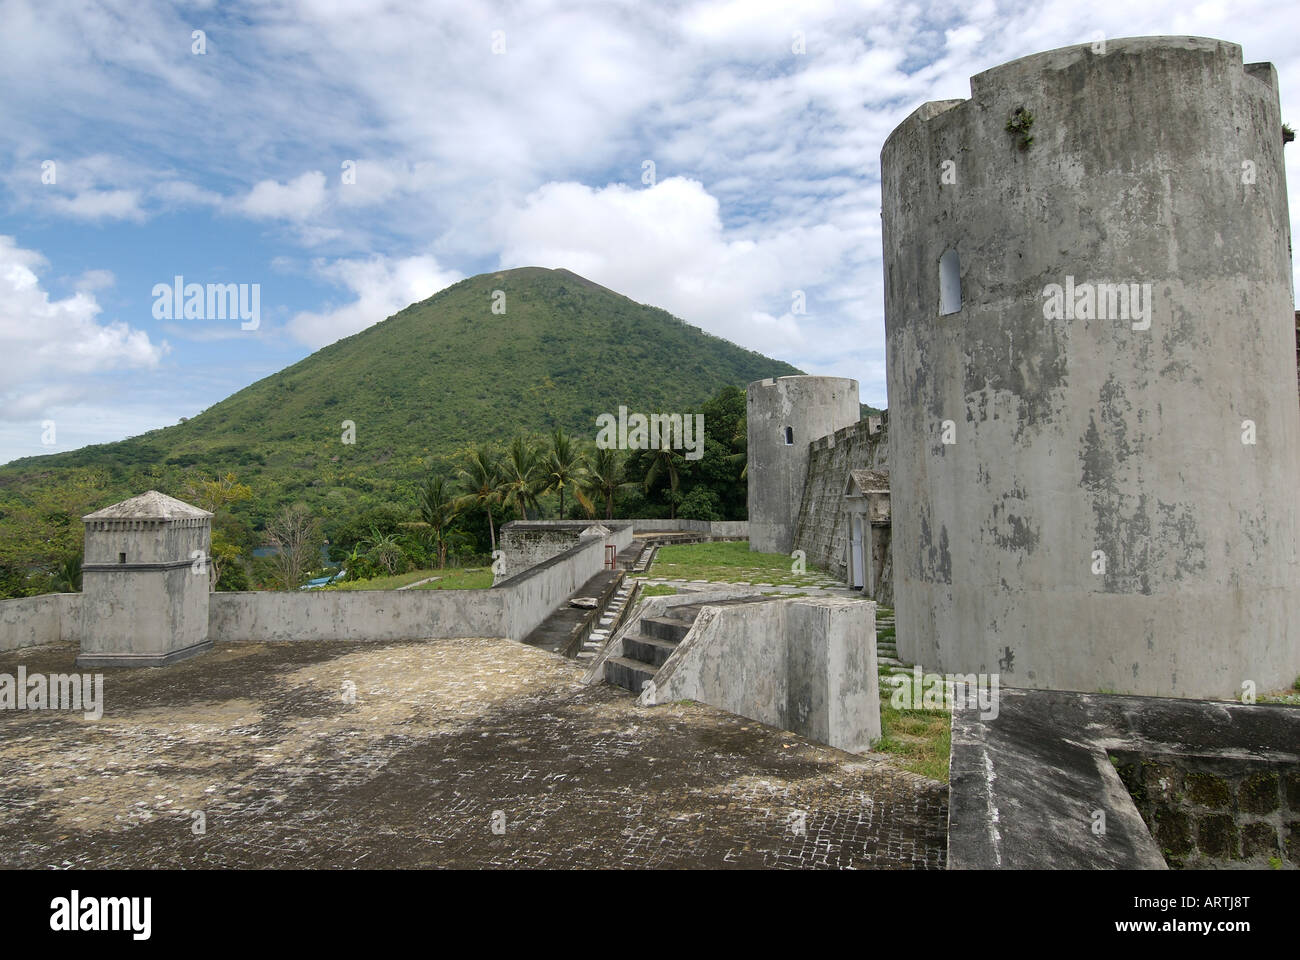 Fort Belgica a relic of the Dutch colonial period in eastern Indonesia with the active volcano Gunung Api in the background Stock Photo